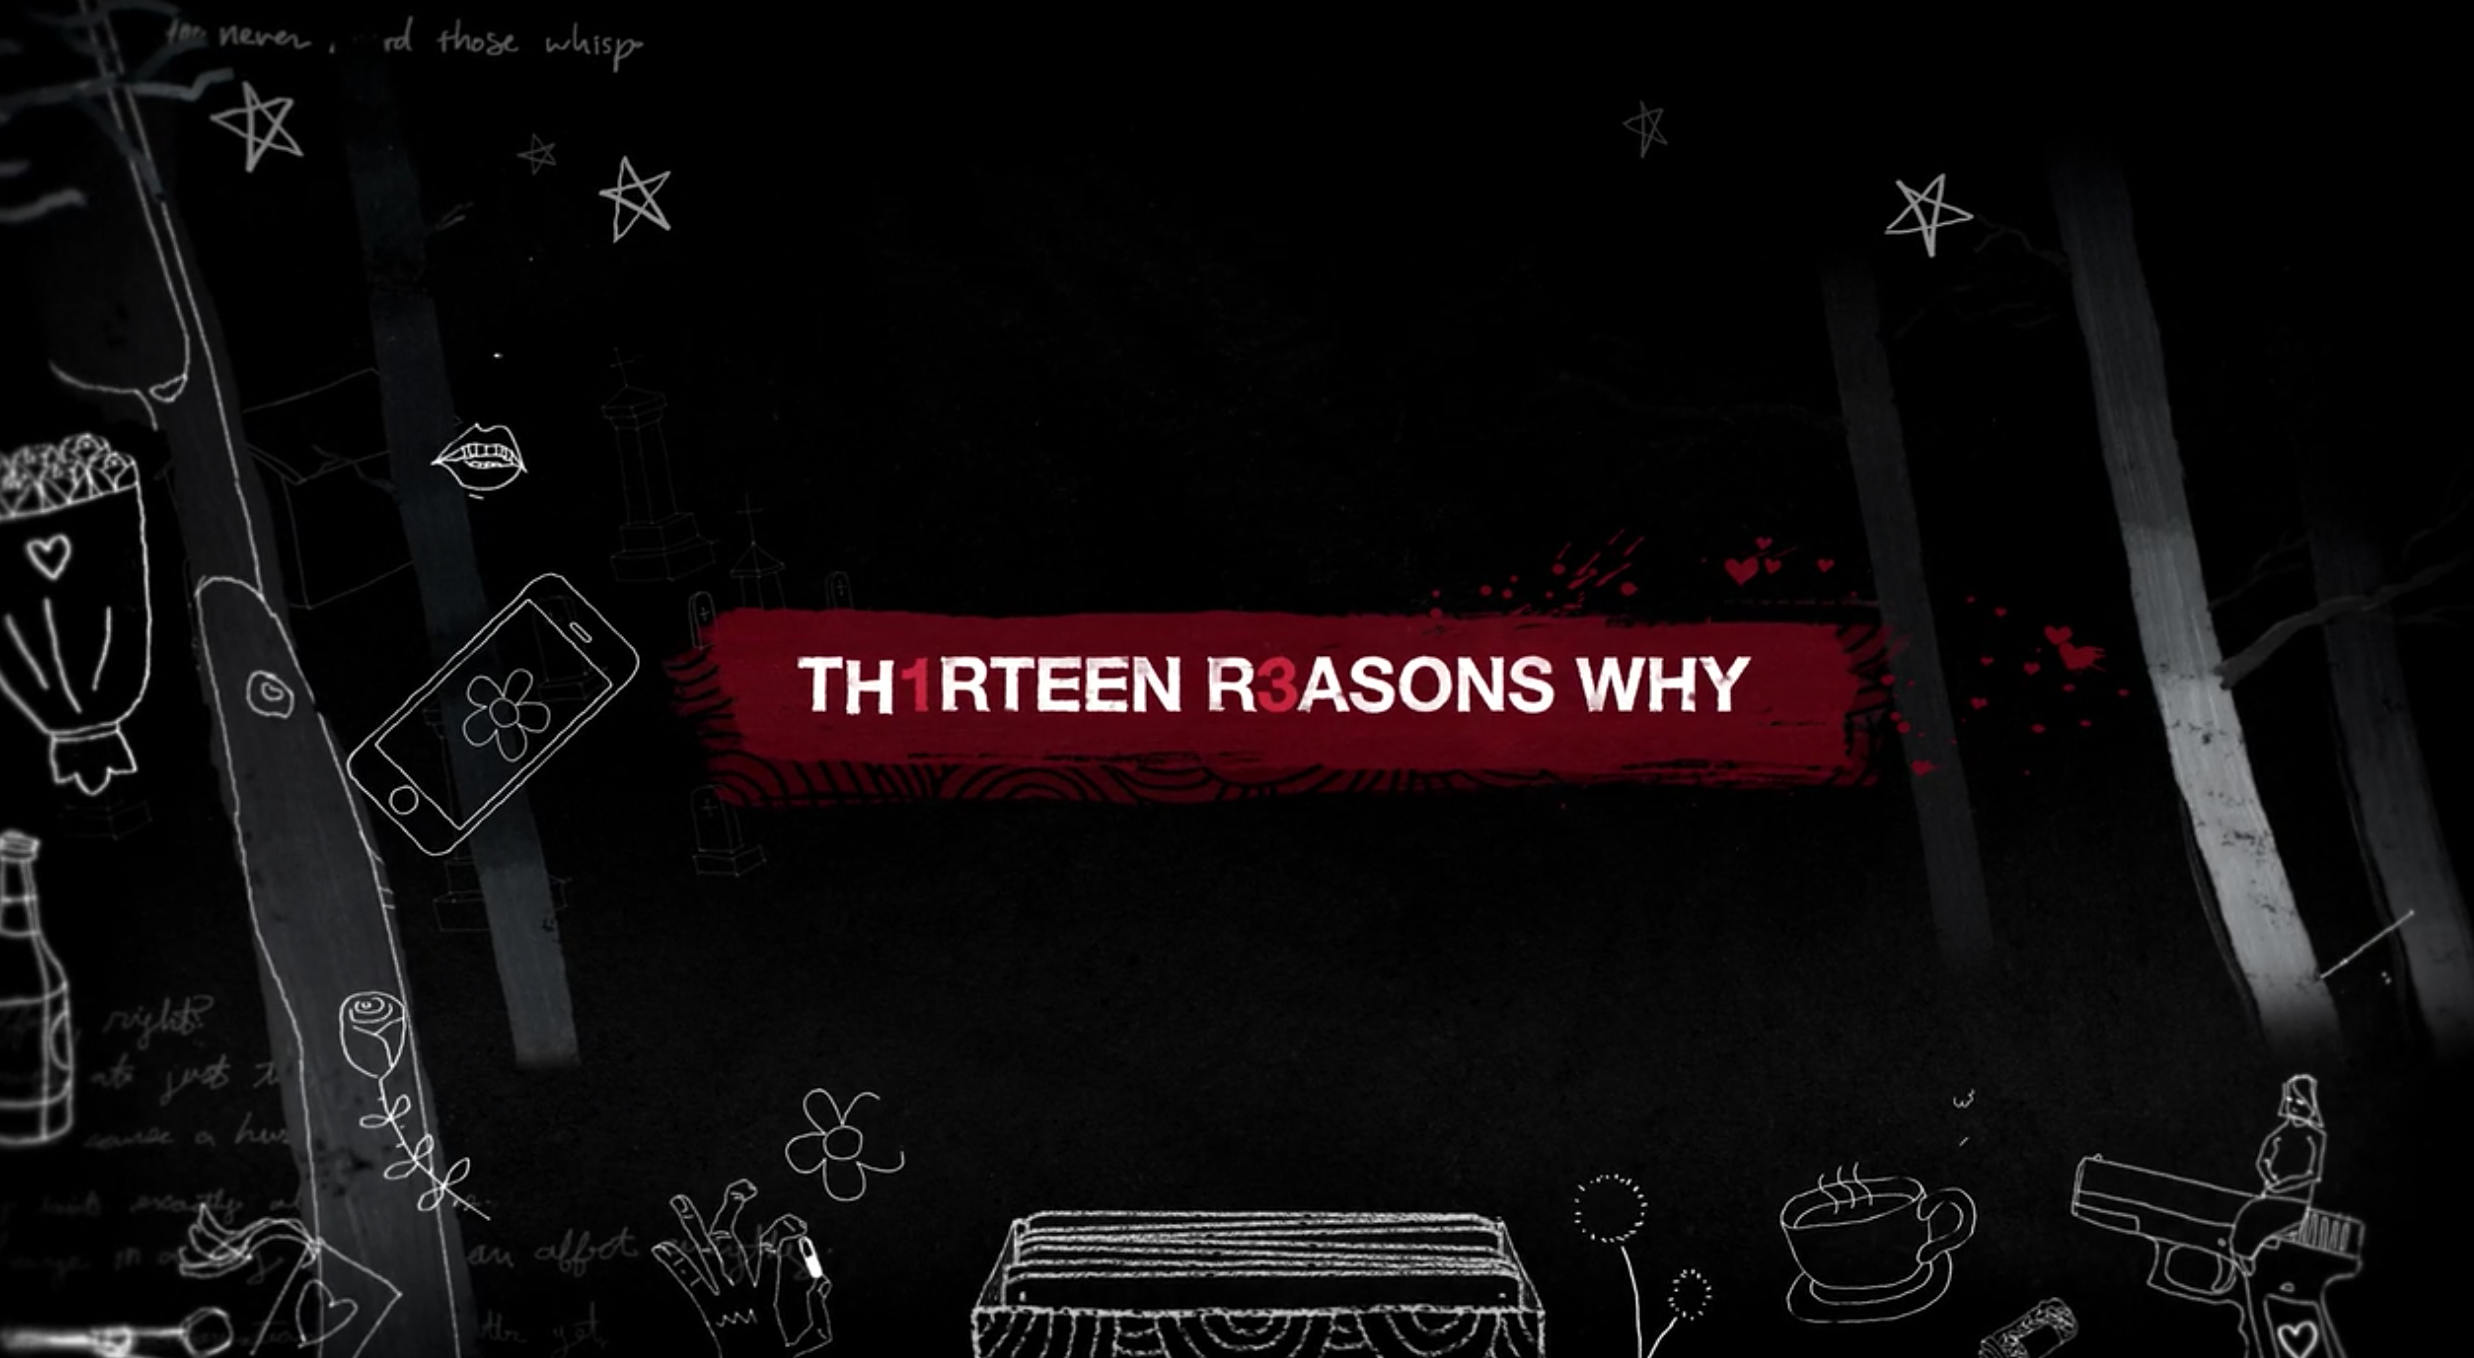 TV Show 13 Reasons Why 2474x1358